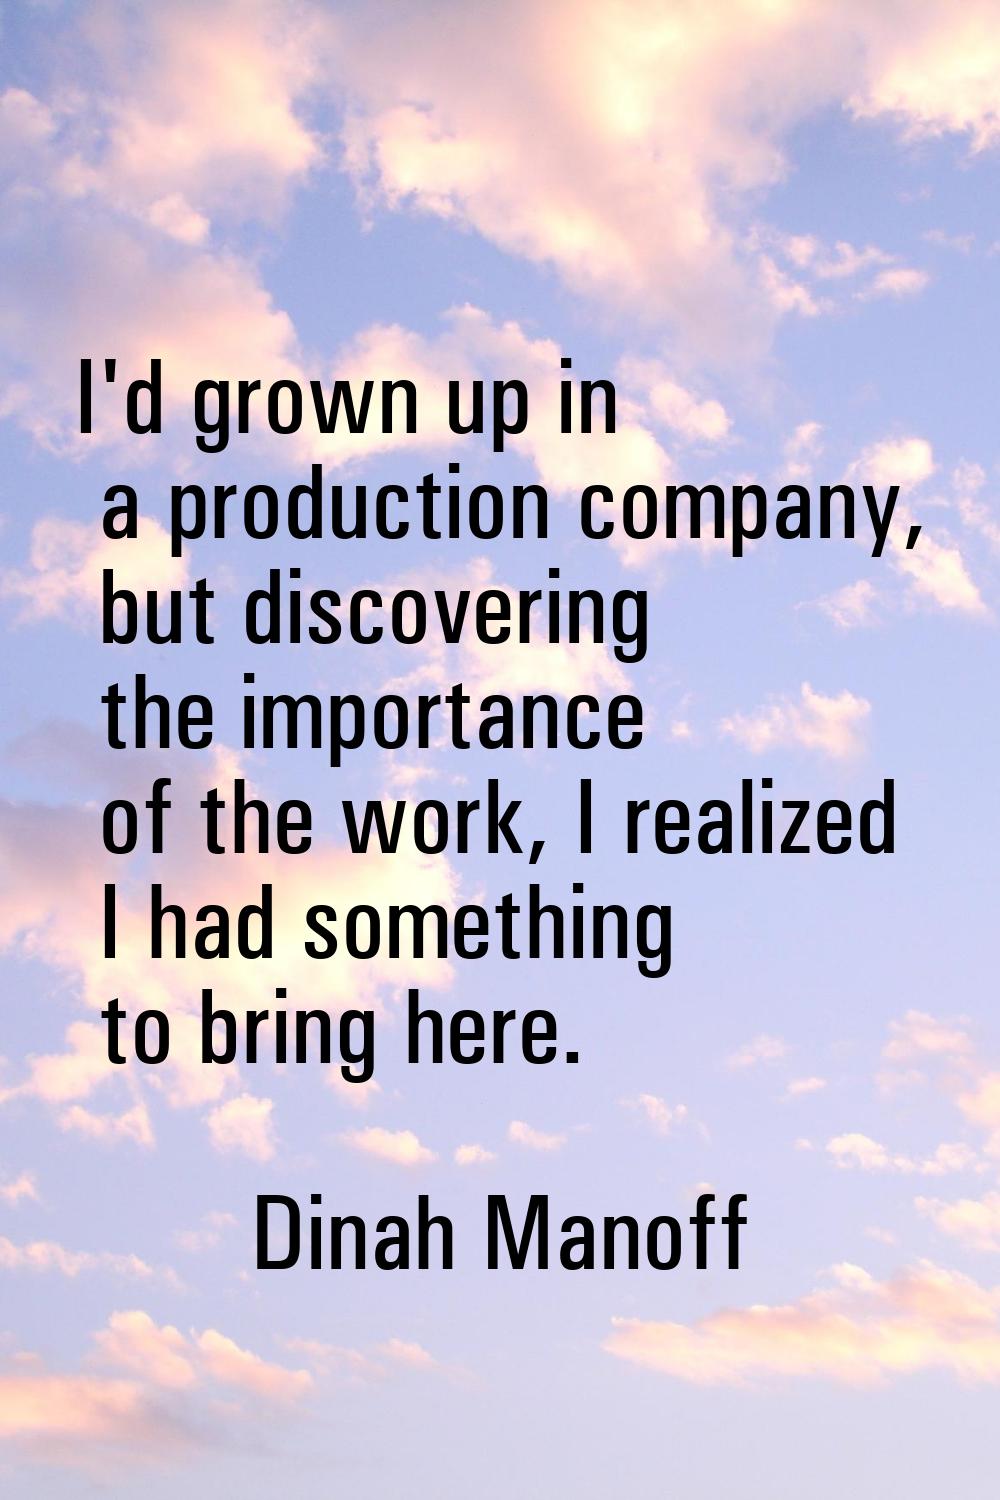 I'd grown up in a production company, but discovering the importance of the work, I realized I had 